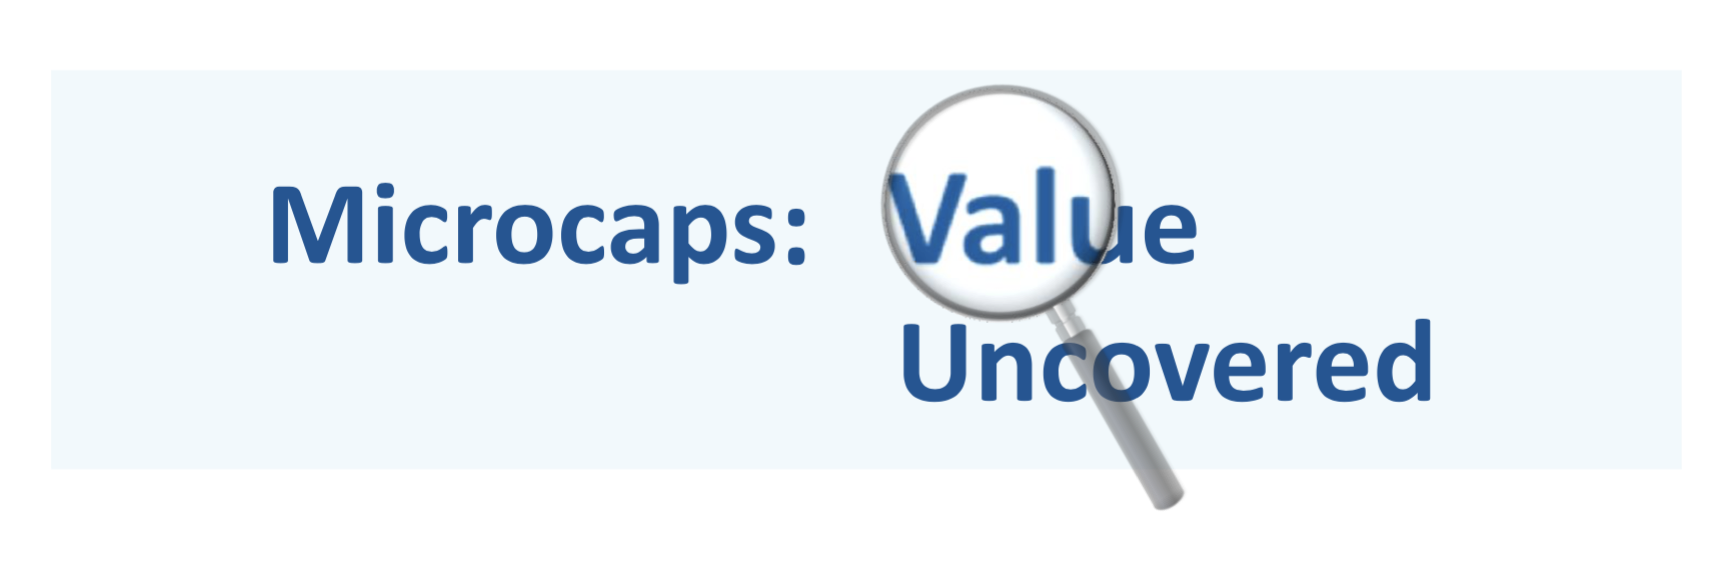 Microcaps: Value Uncovered